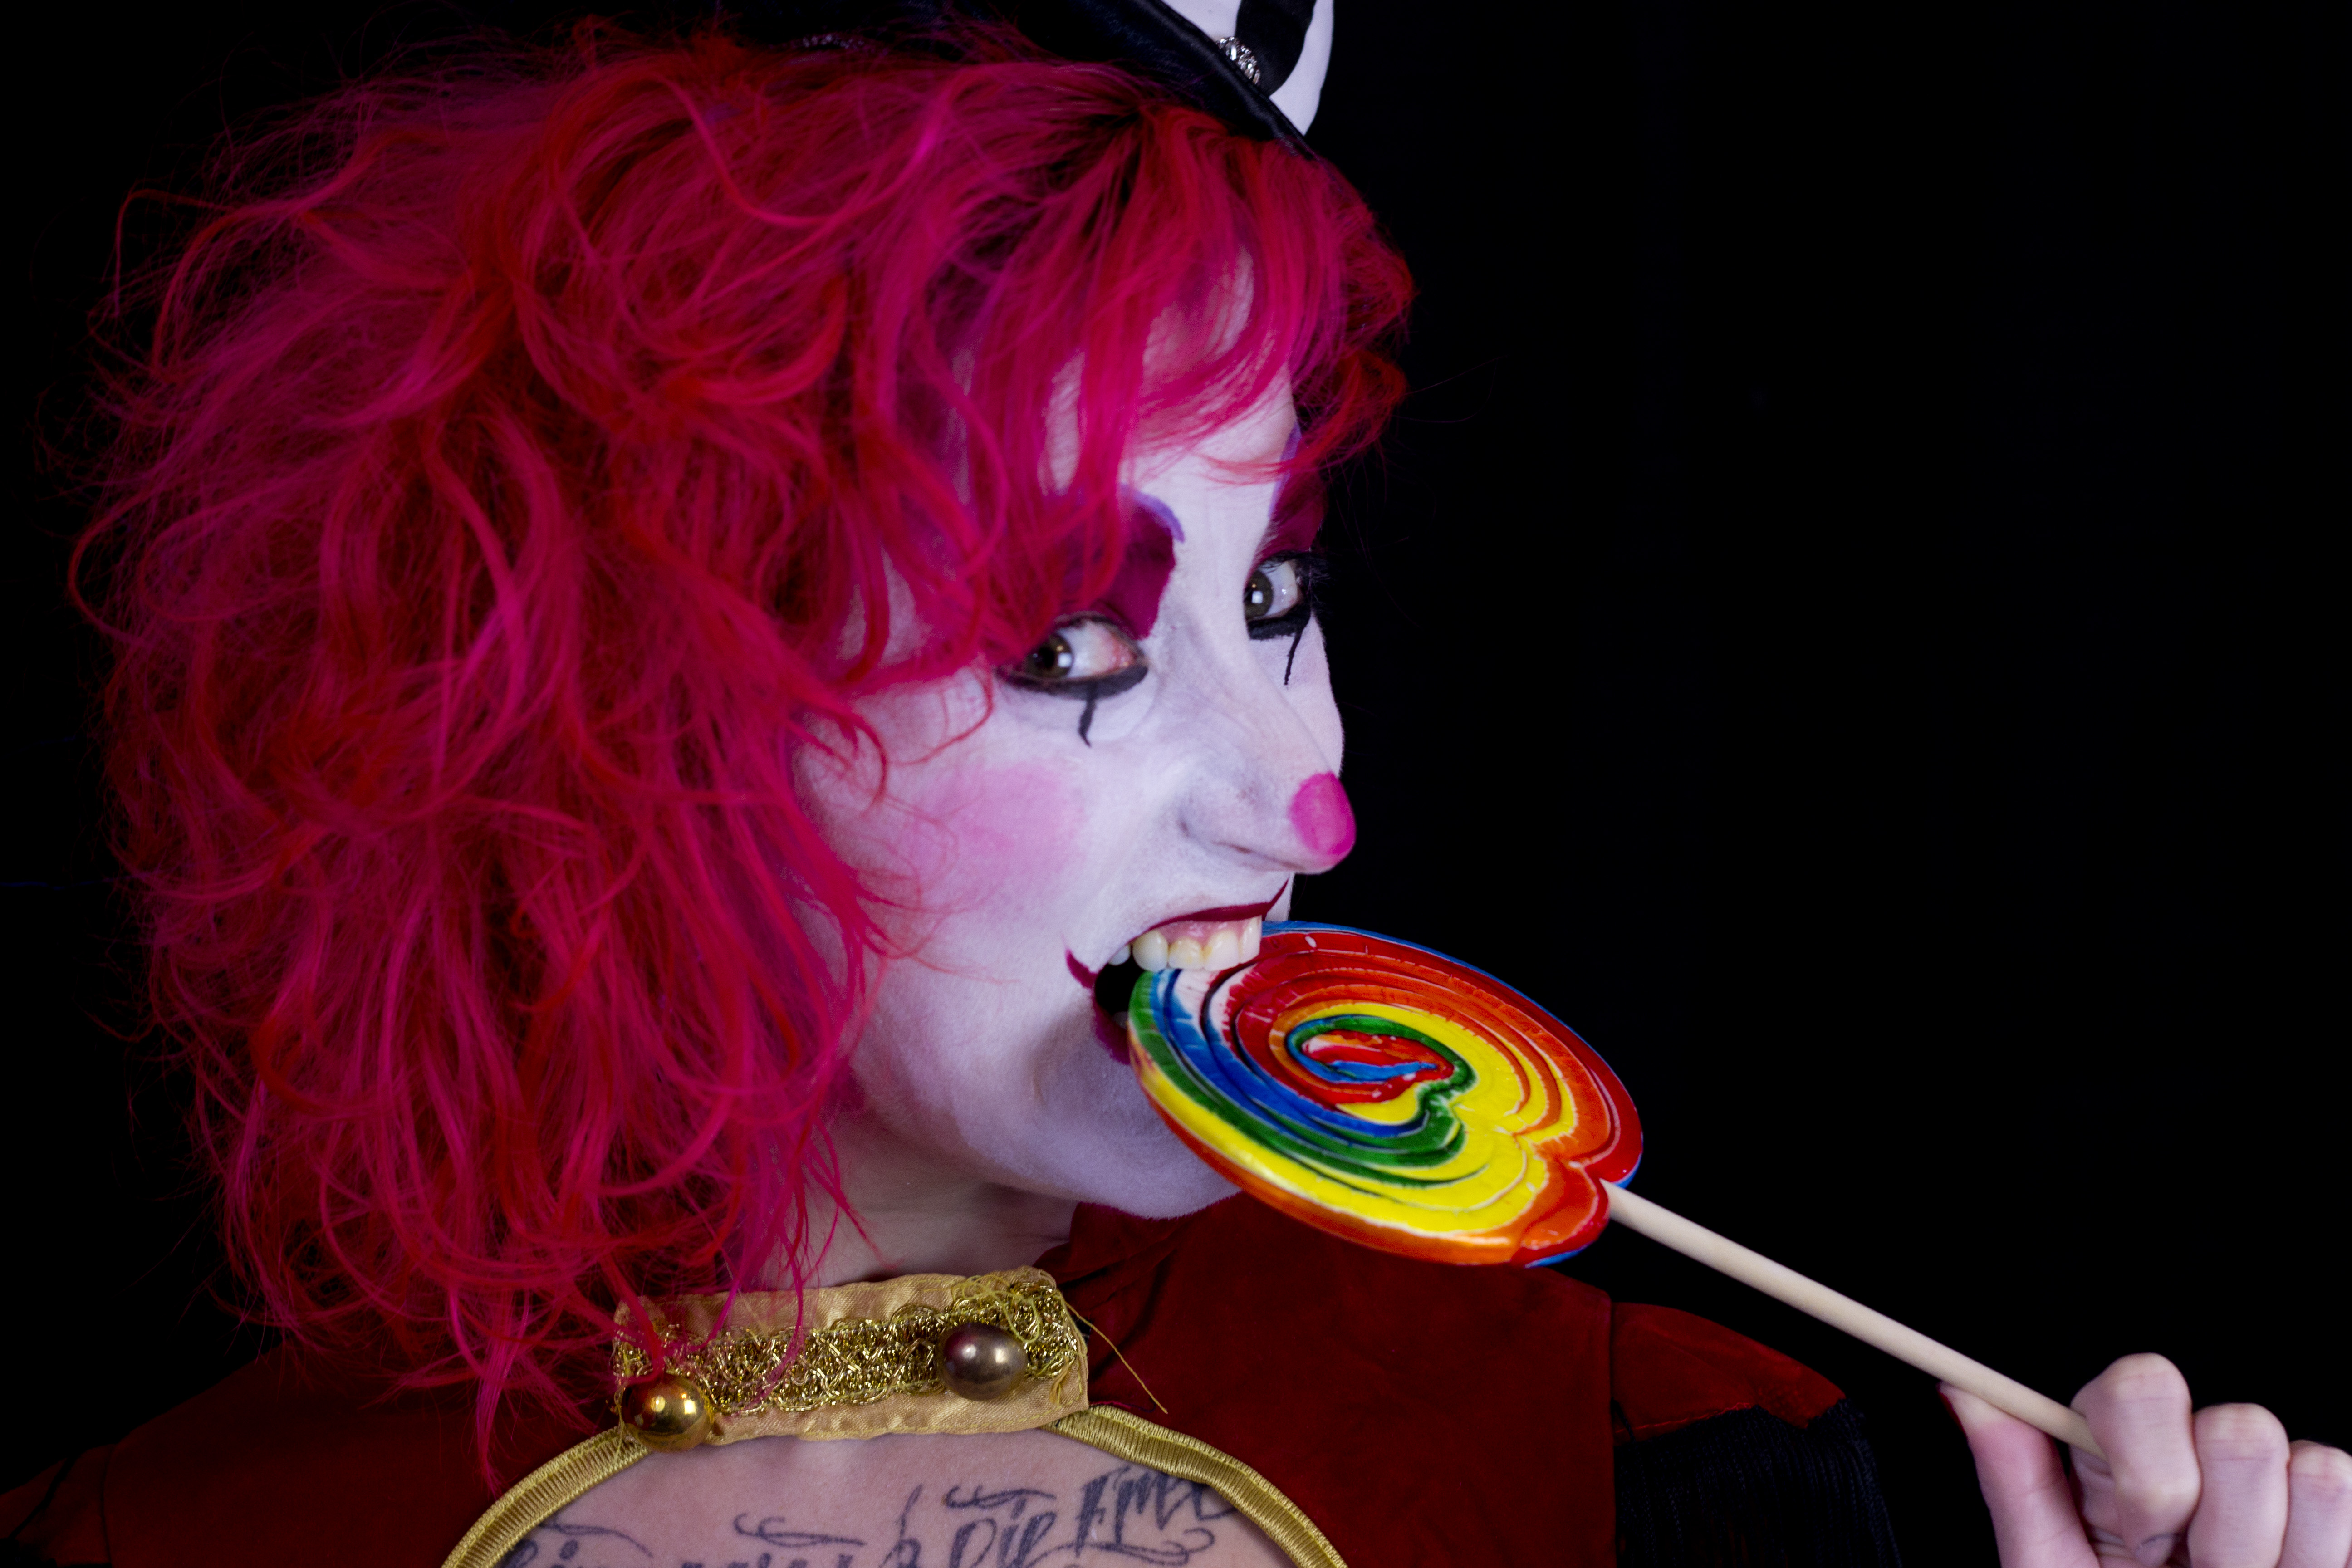 Clown Fetish Porn - Inside the Kinky, Brightly Colored World of Clown Fetishists